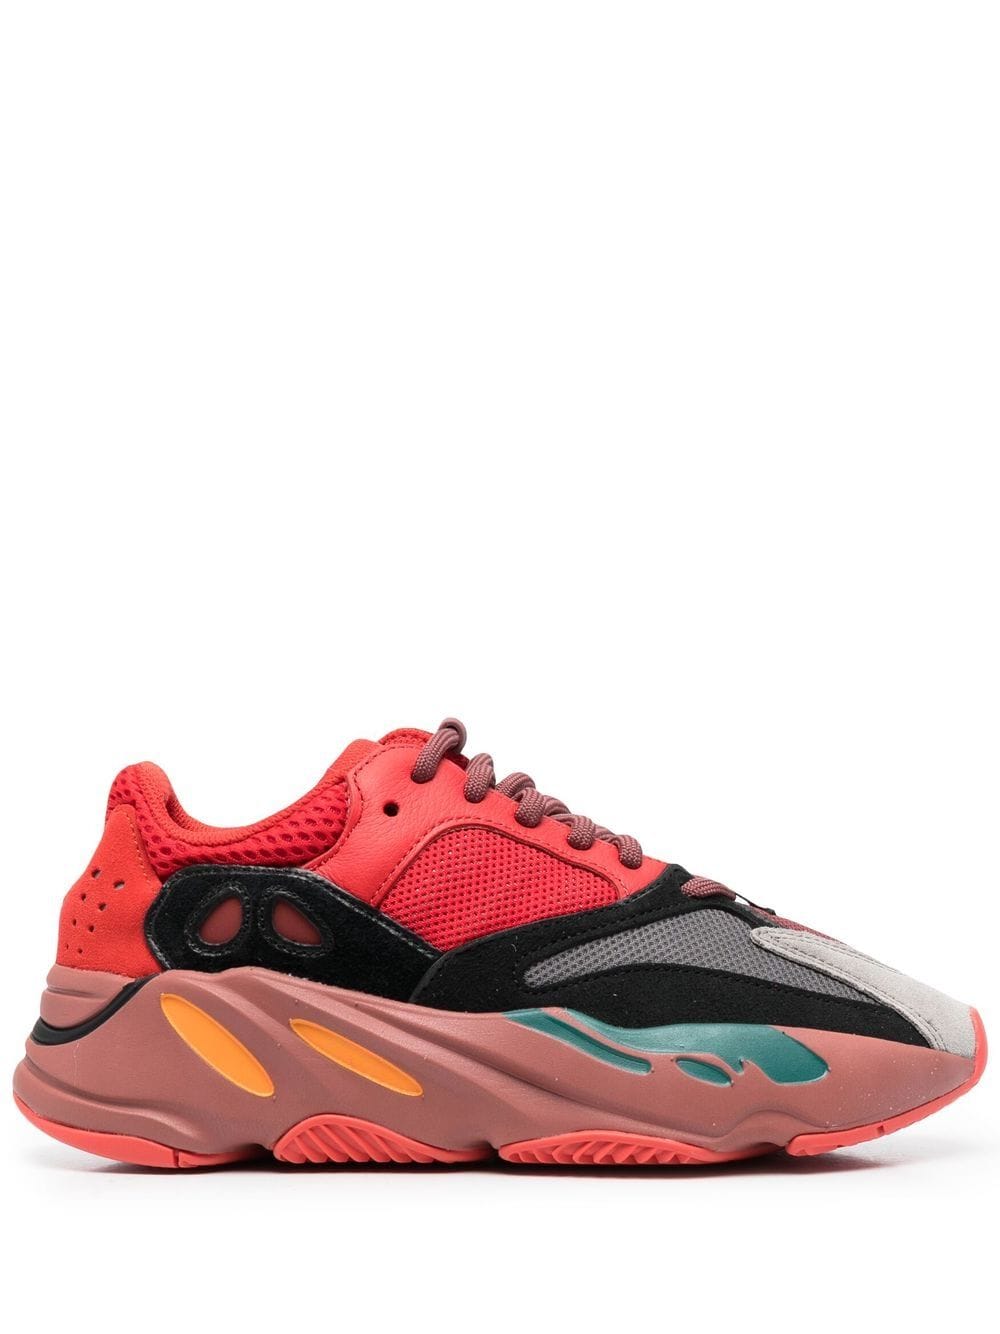 adidas Yeezy YEEZY Boost 700 Hired Sneakers - Rot von adidas Yeezy